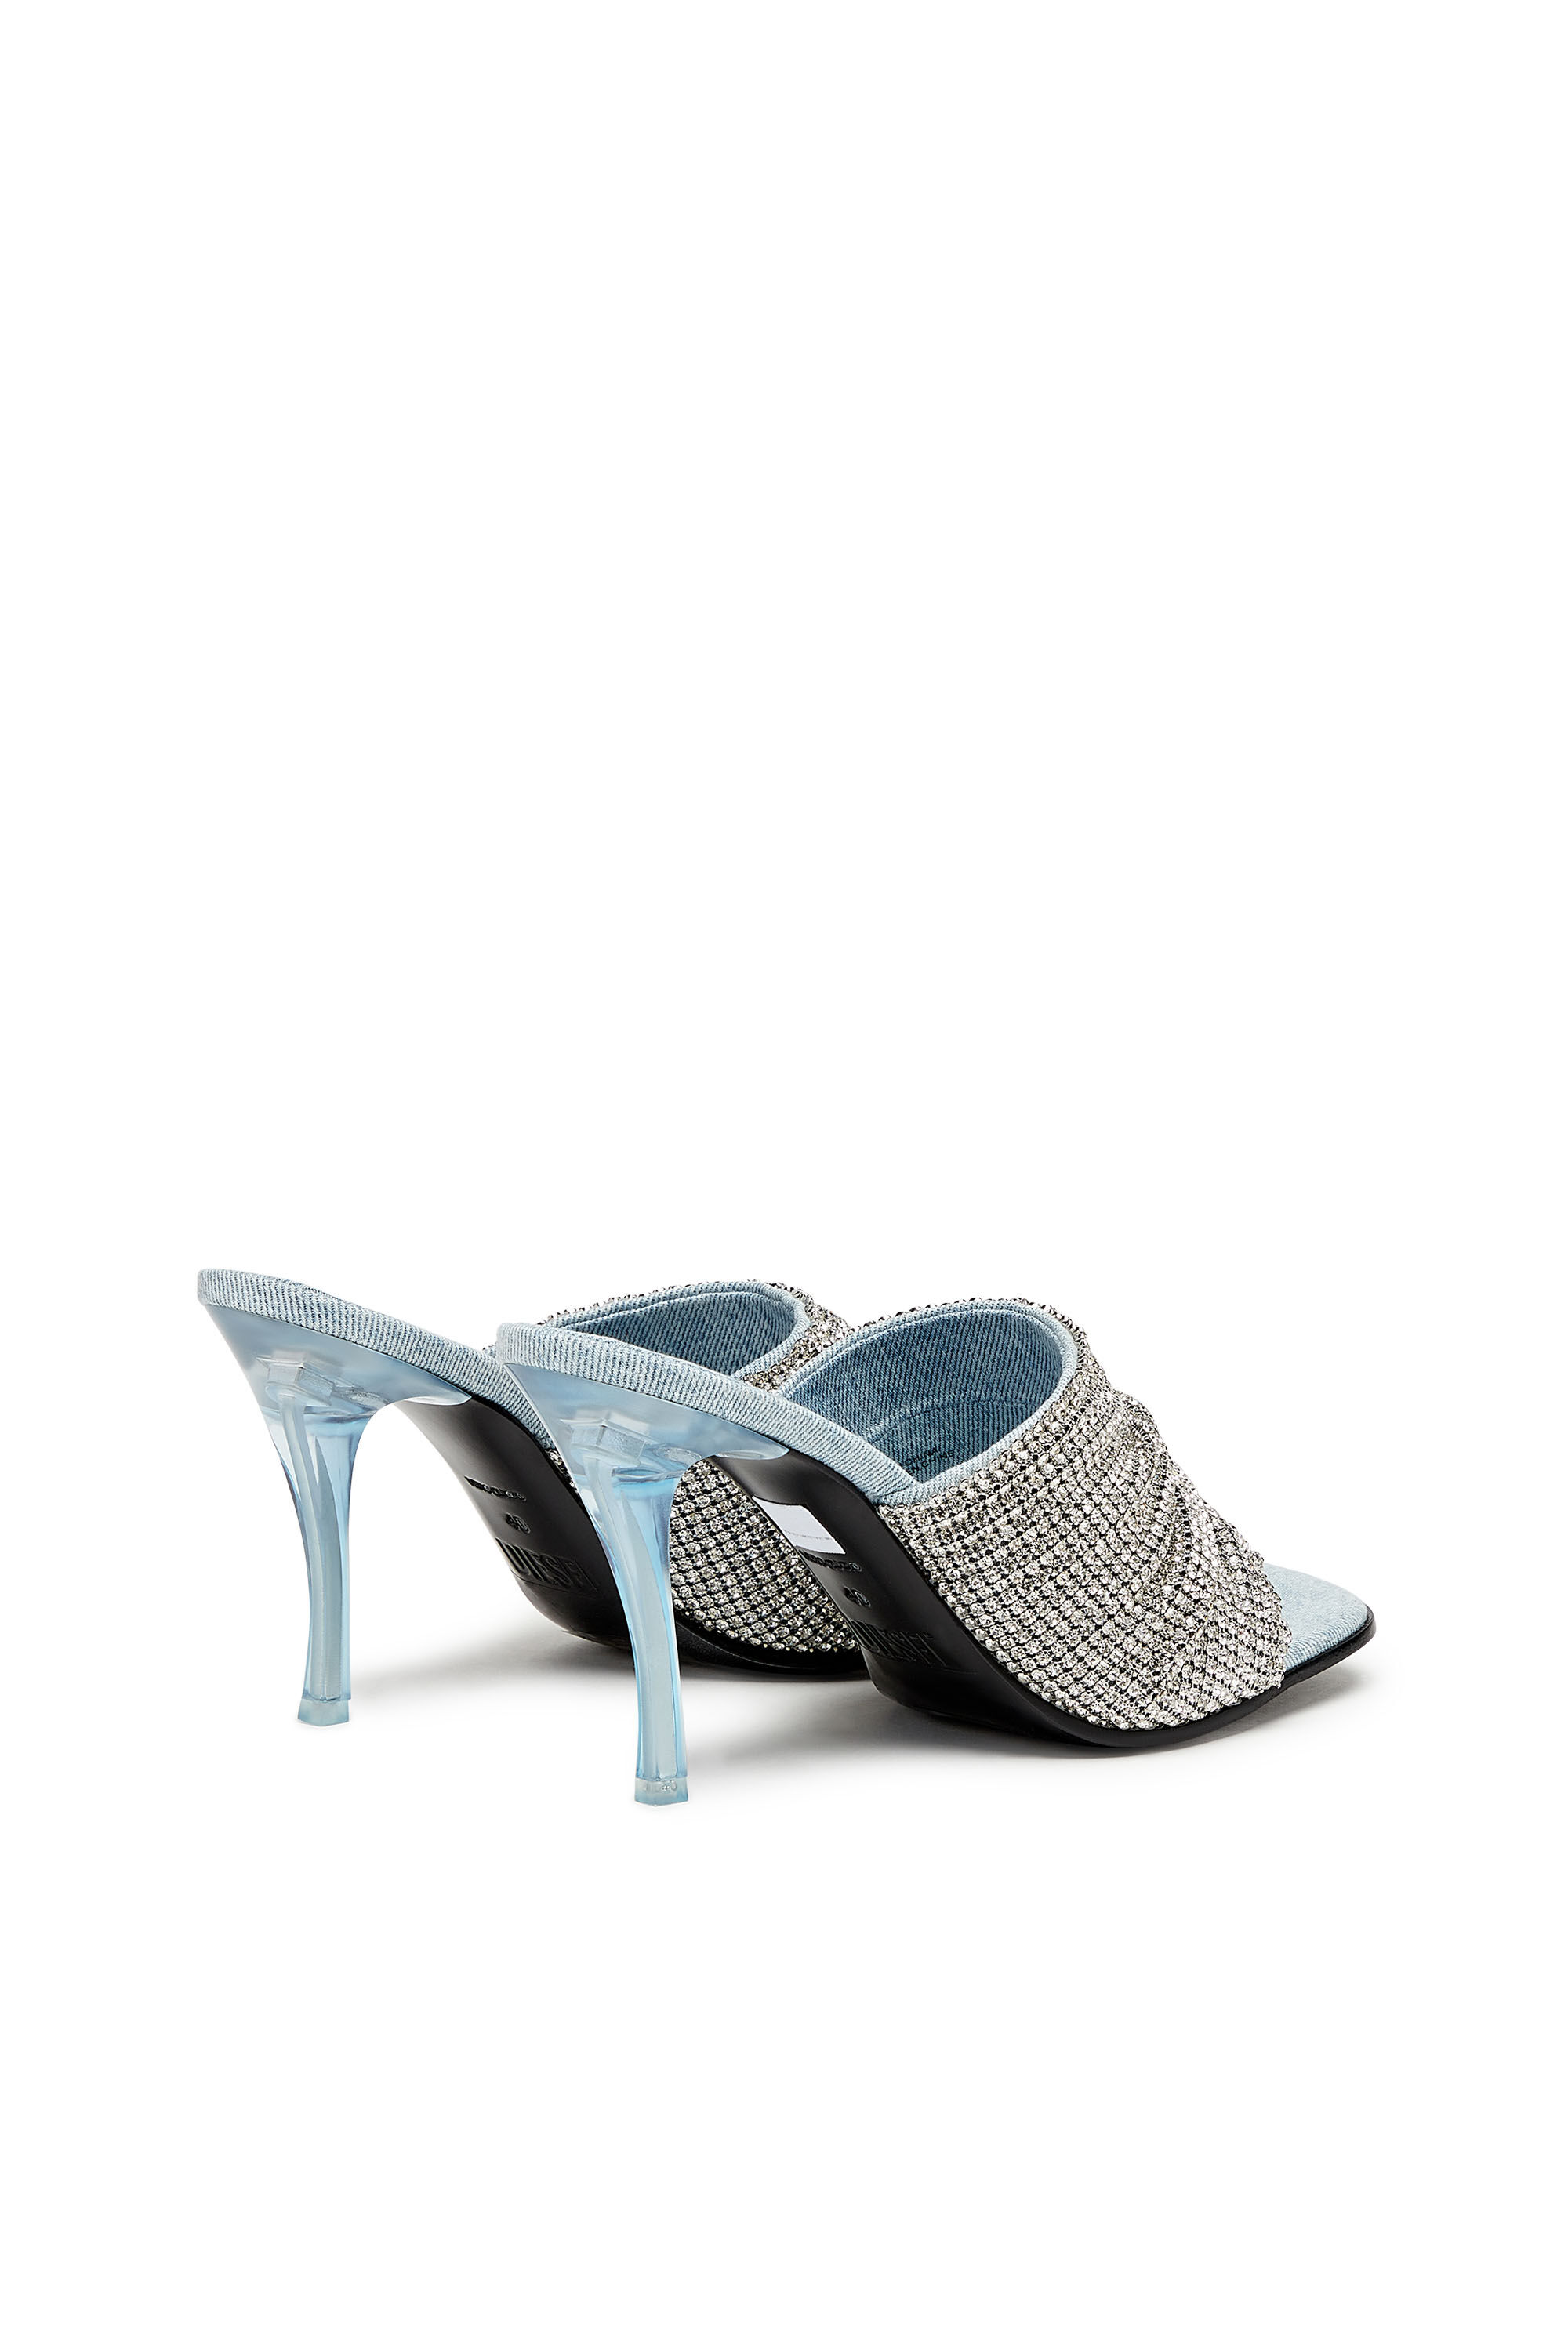 Diesel - D-SYDNEY SDL S, Woman D-Sydney Sdl S Sandals - Mule sandals with rhinestone band in Silver - Image 3